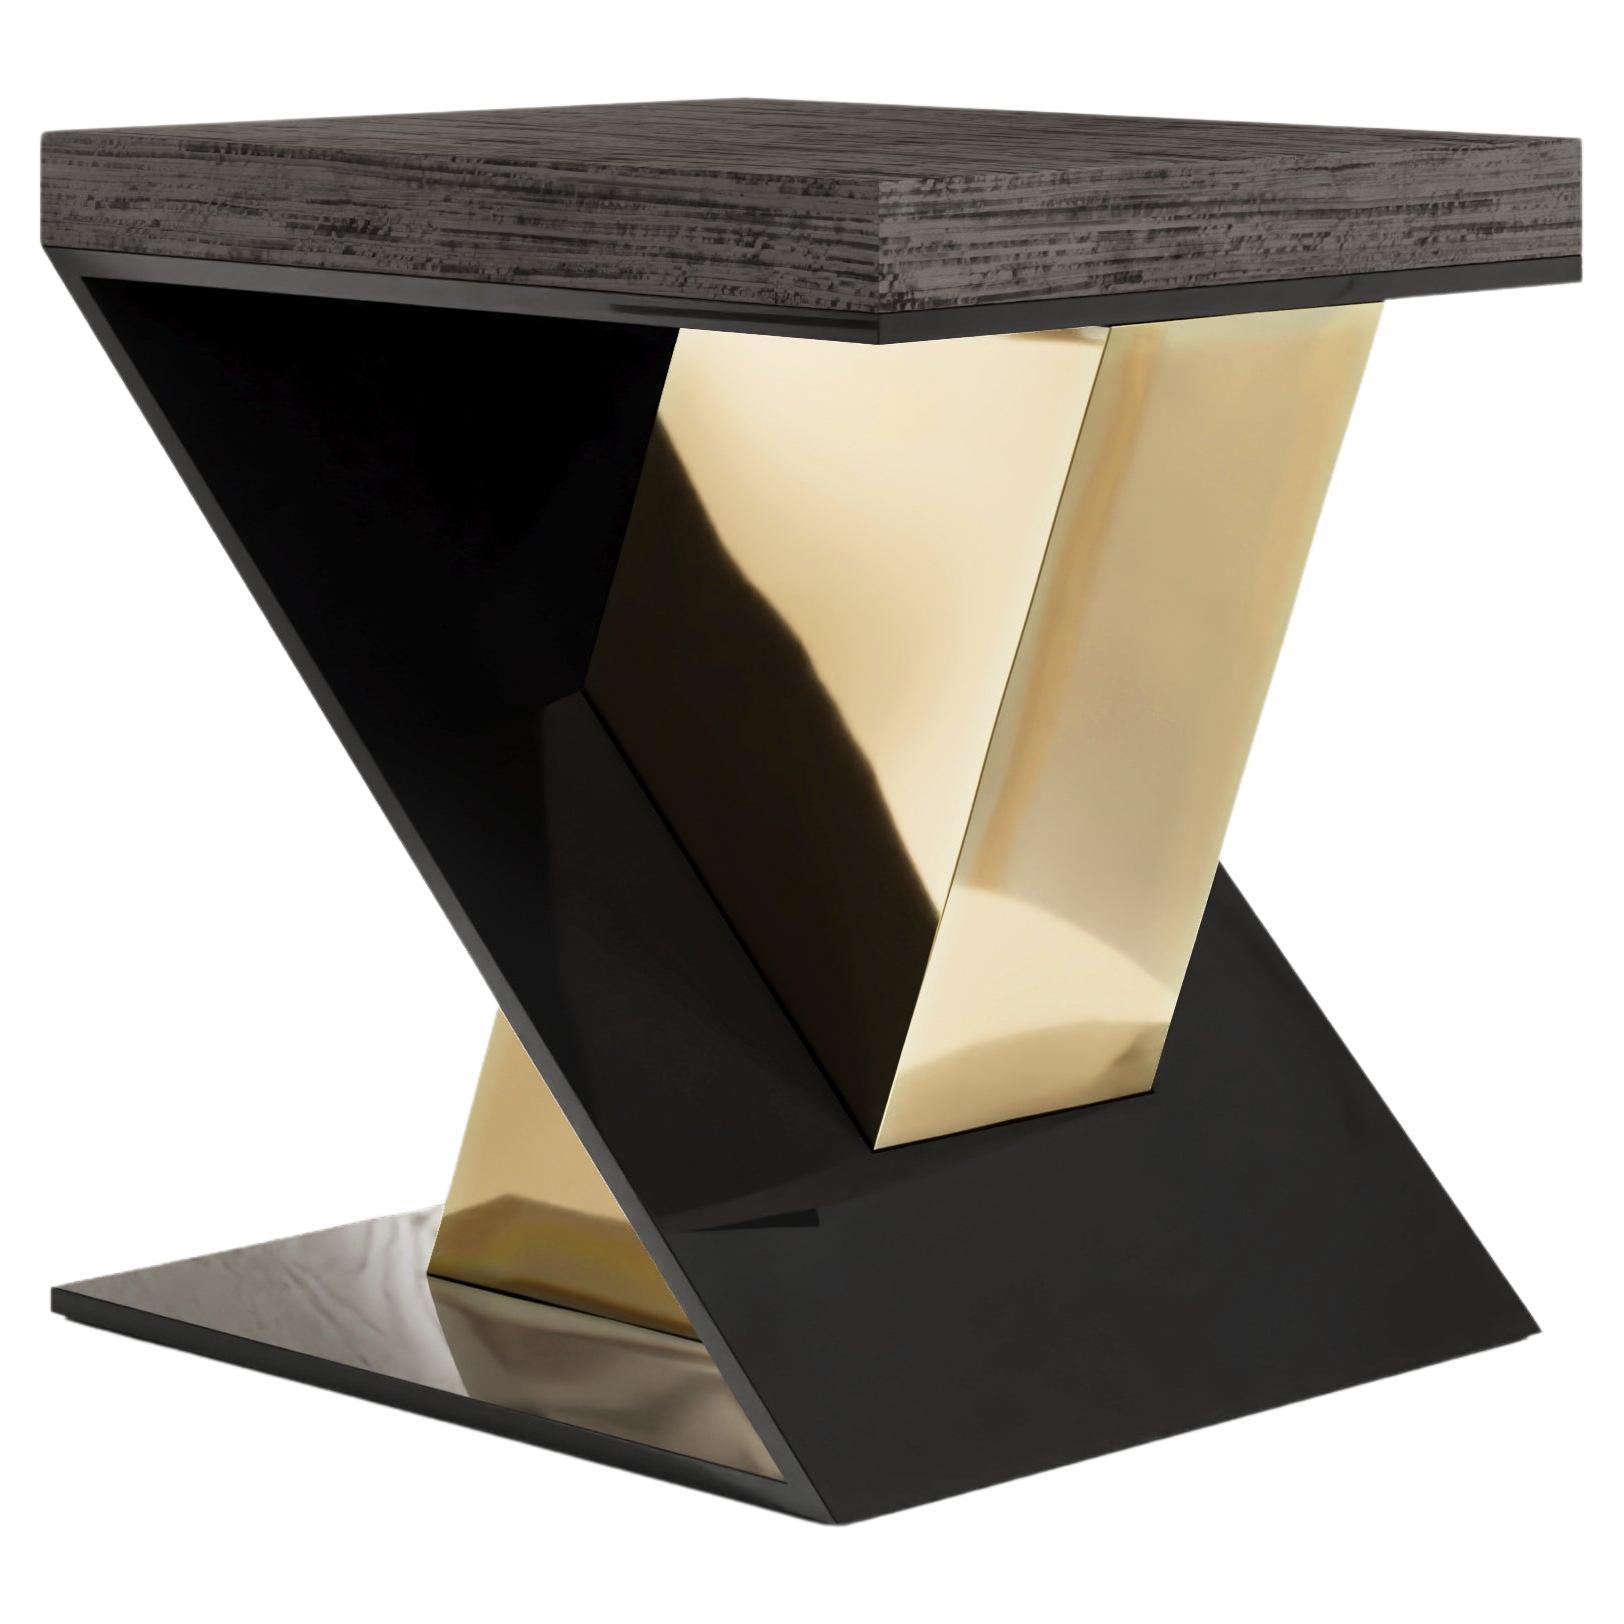 Gero Side Table in polished bronze and Eucalyptus For Sale